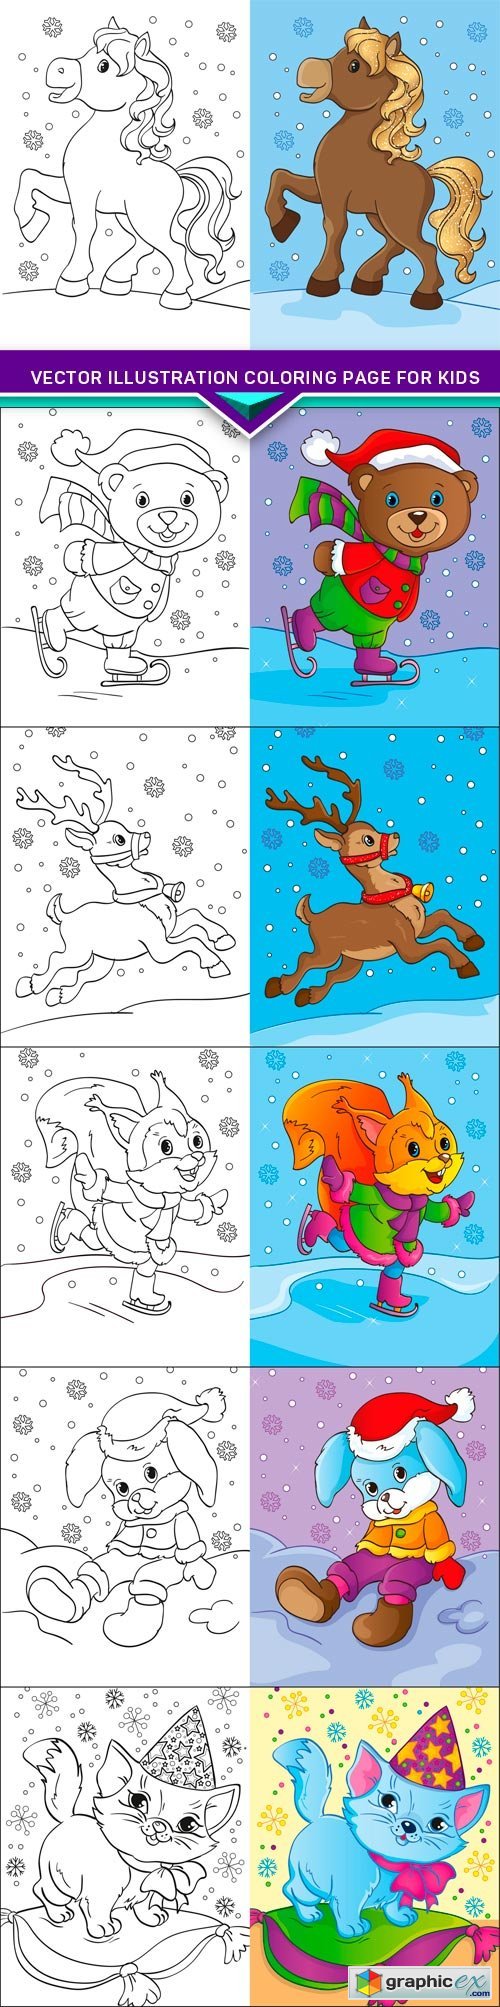 illustration coloring page for kids 6X EPS